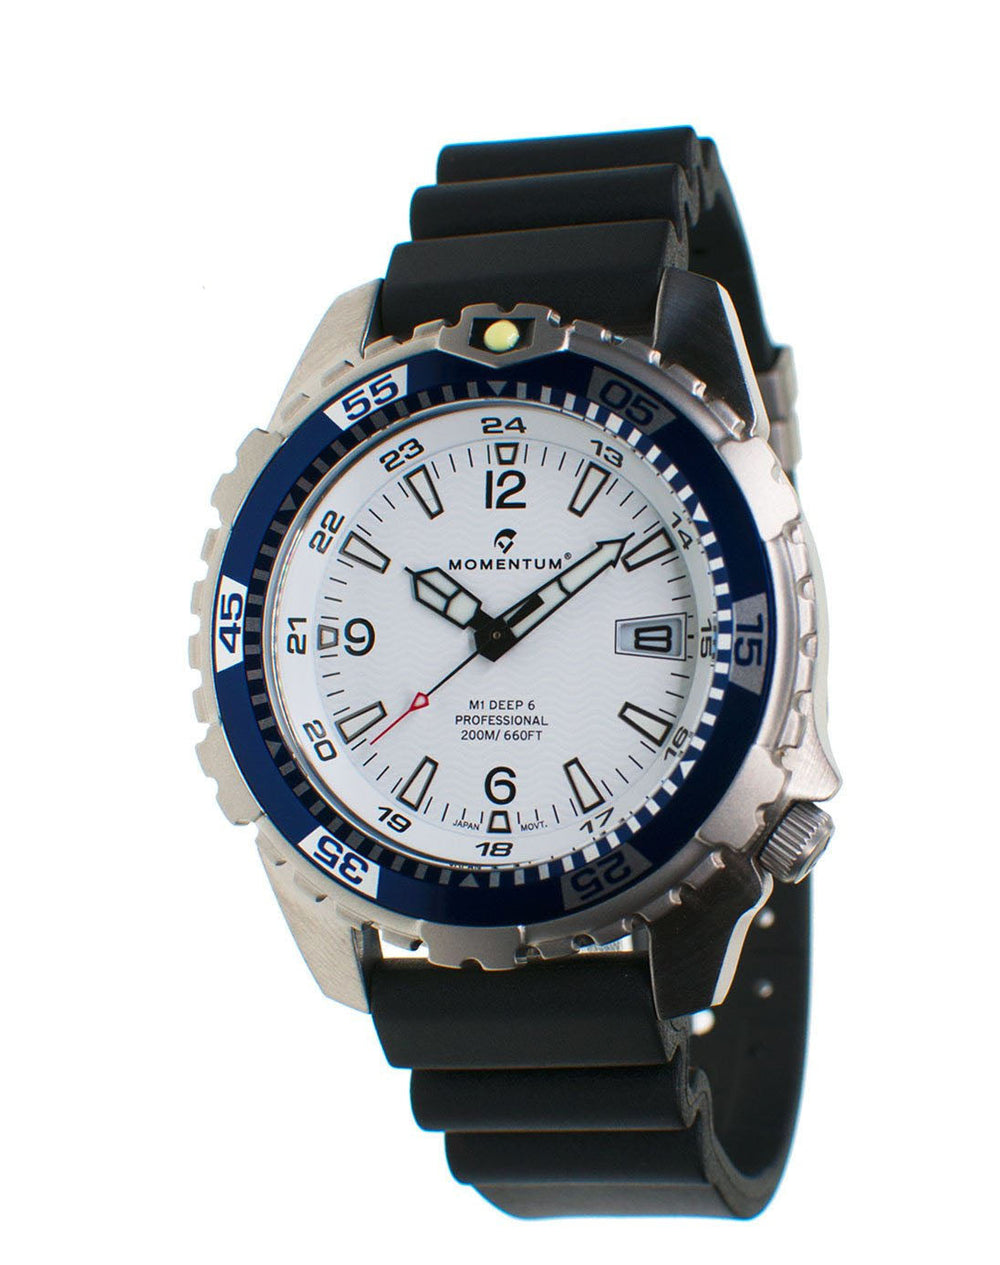 Momentum Momentum Deep 6 in White Face with Black 'Hyper' Rubber Strap & Sapphire Glass - Oyster Diving